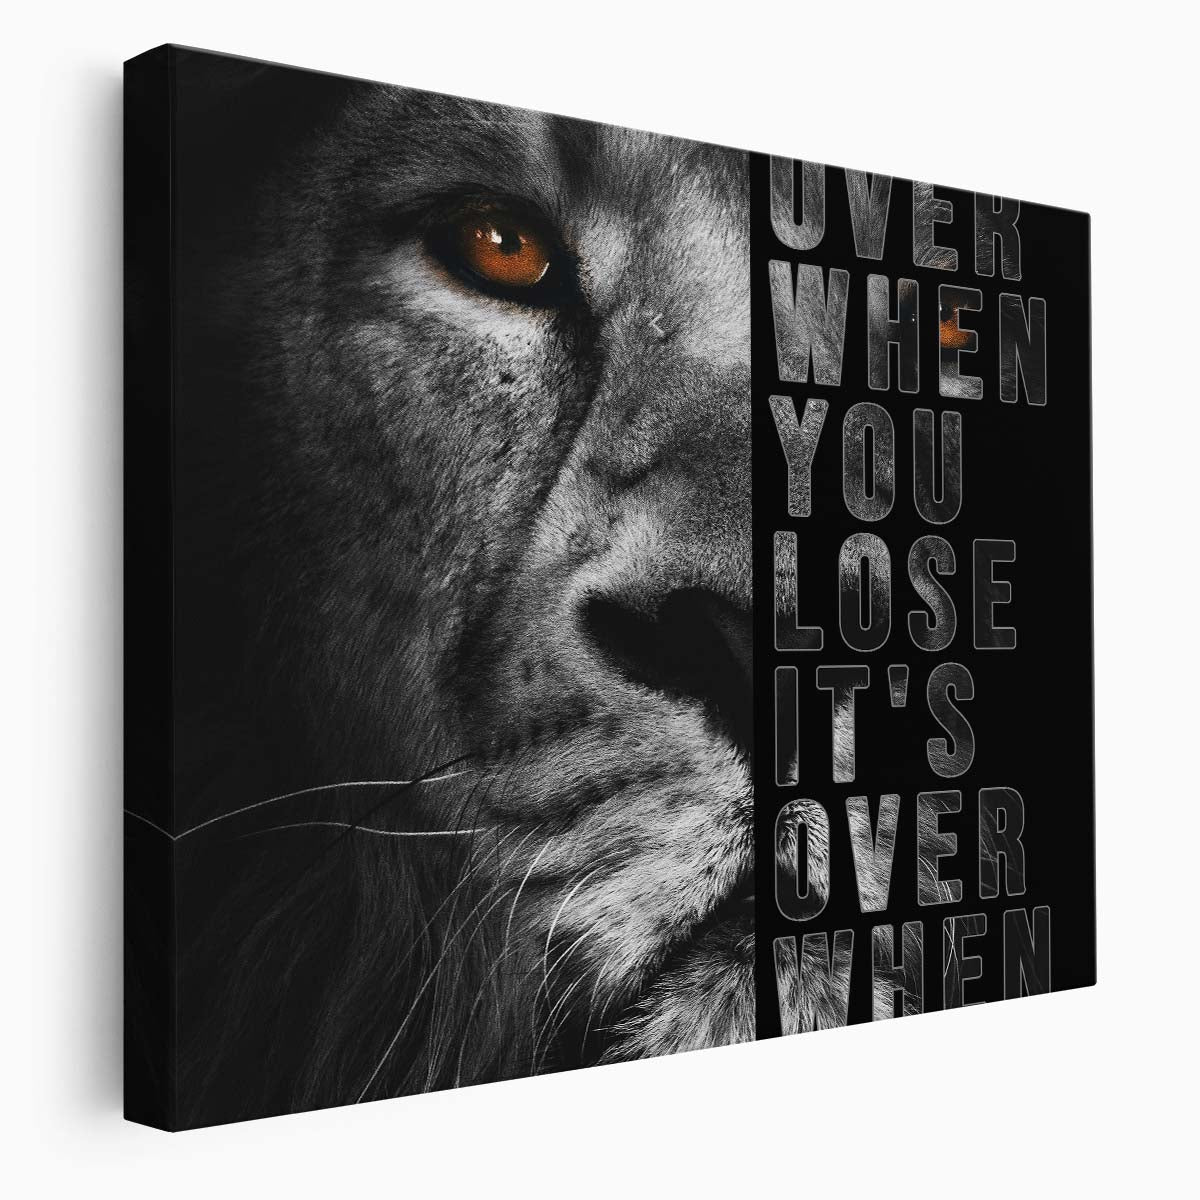 It's Not Over When You Lose Wall Art by Luxuriance Designs. Made in USA.